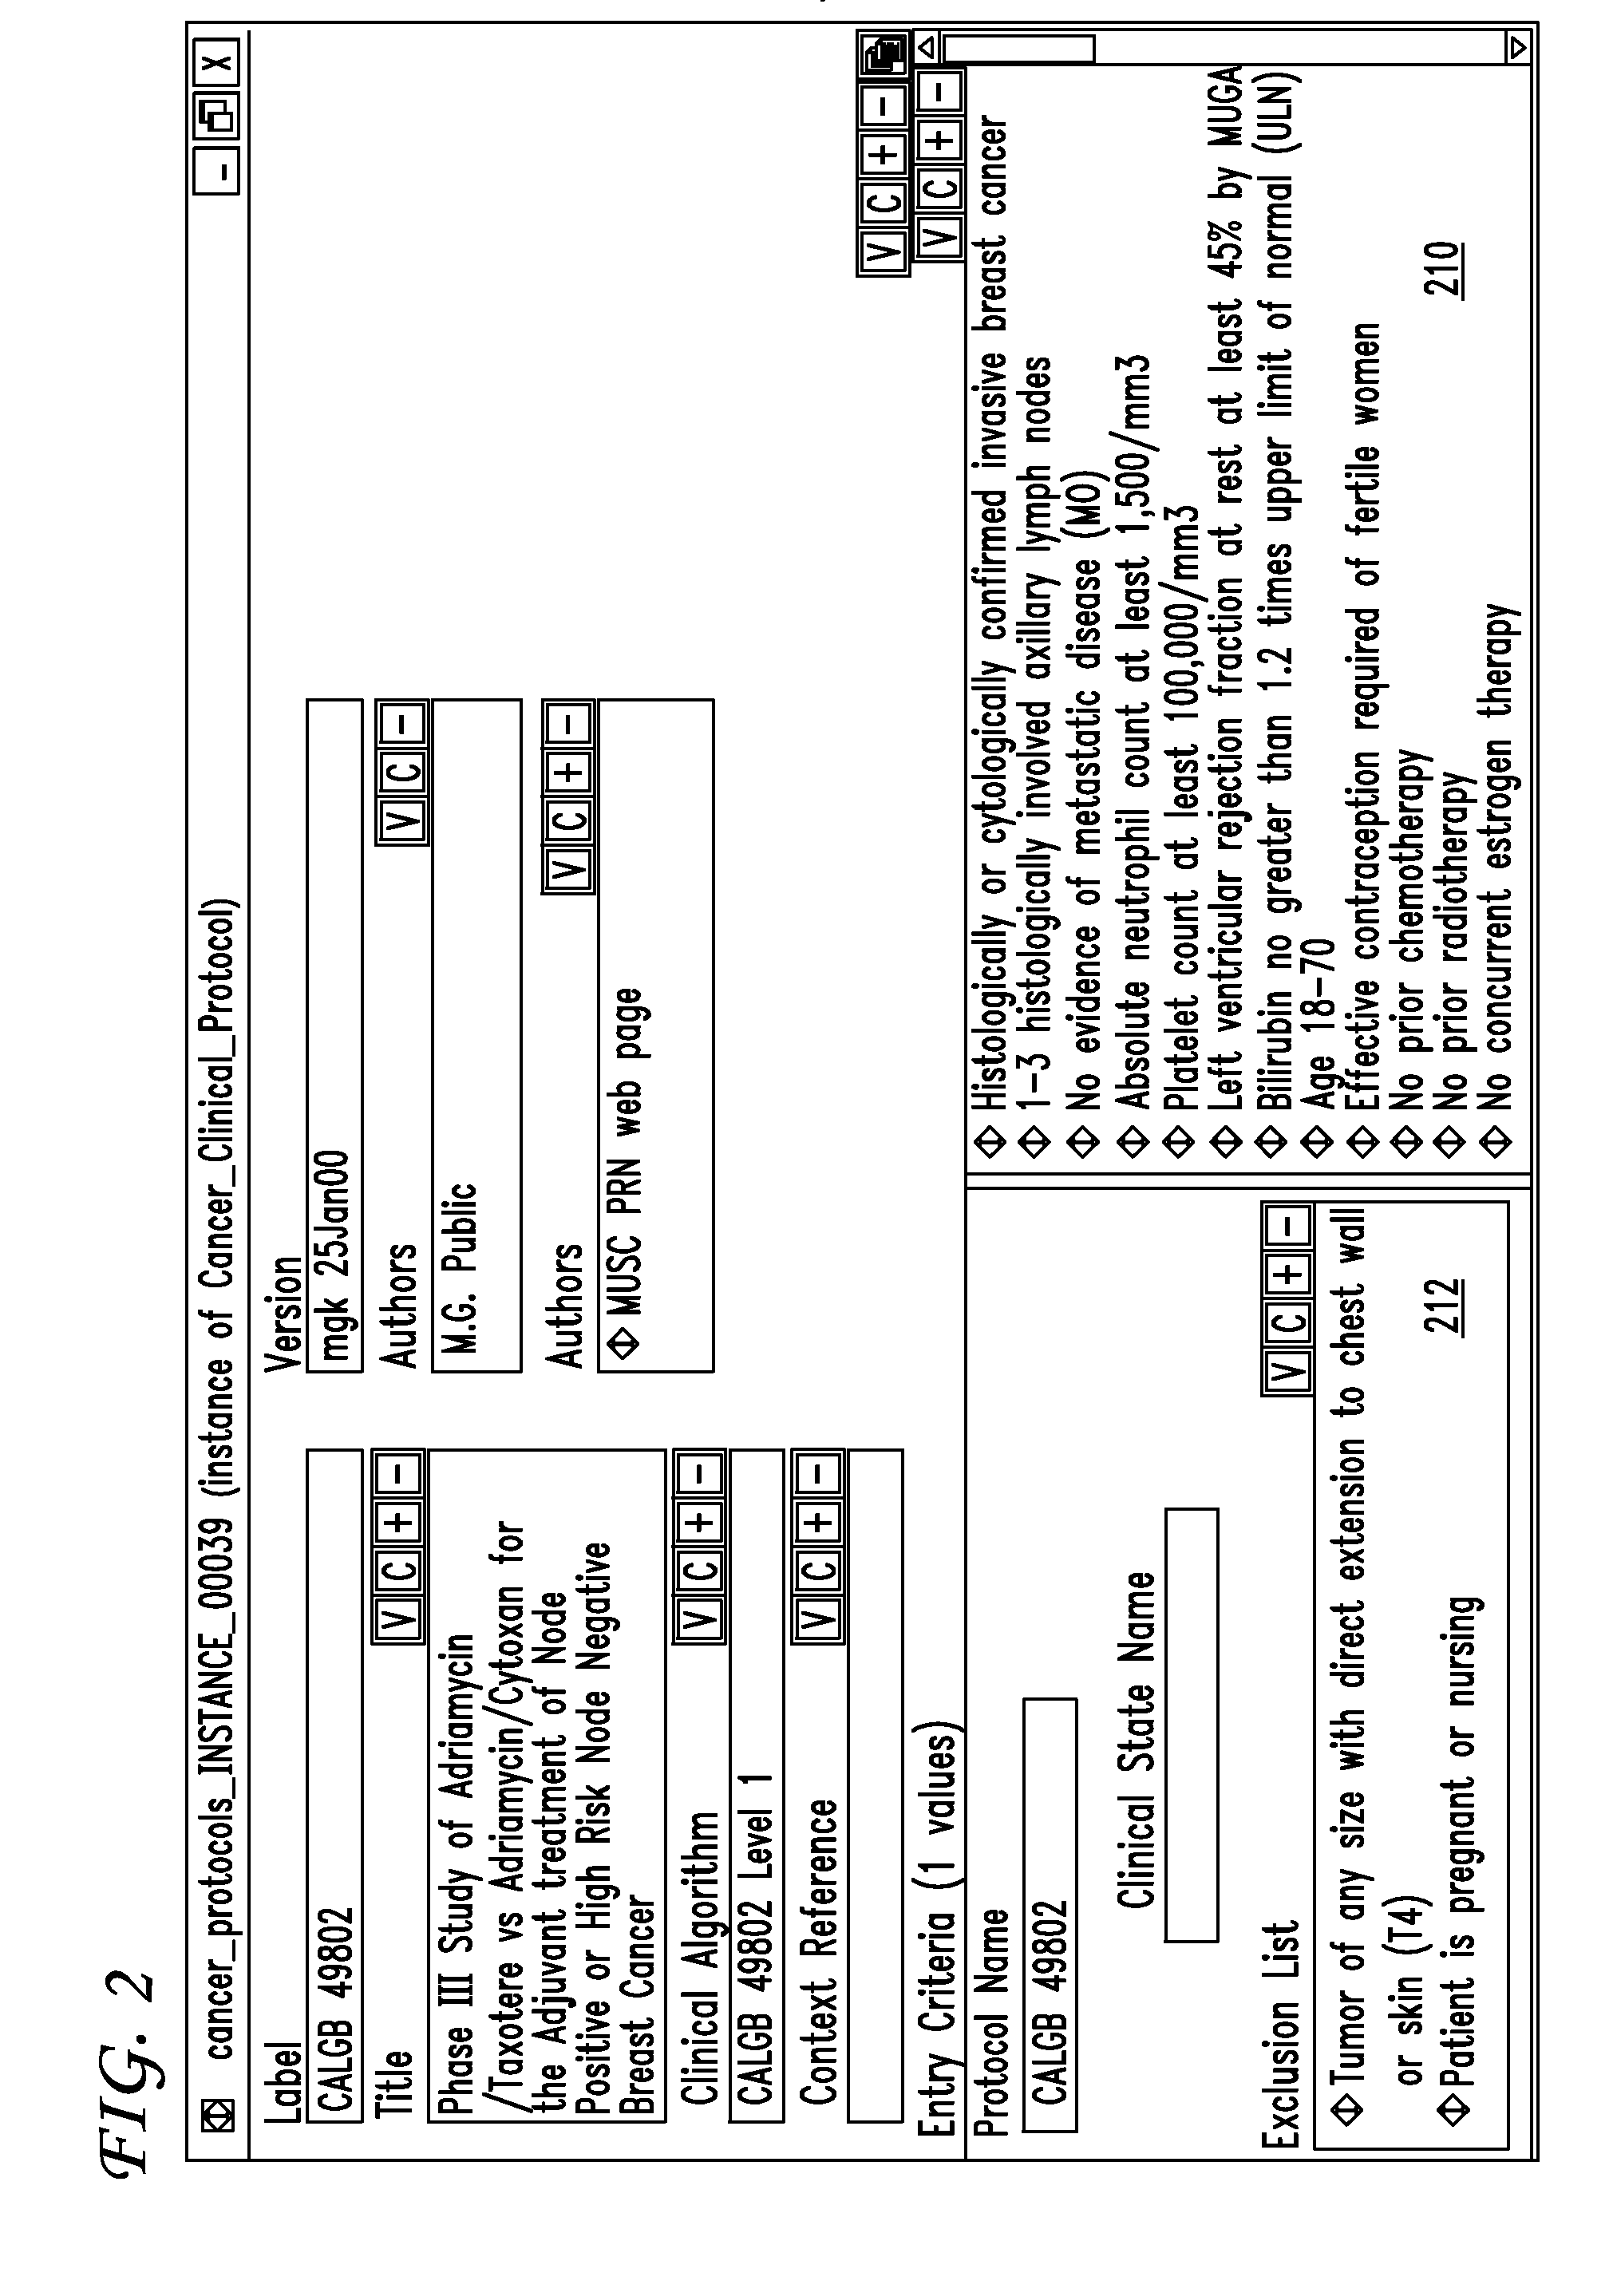 Clinical trials management system and method